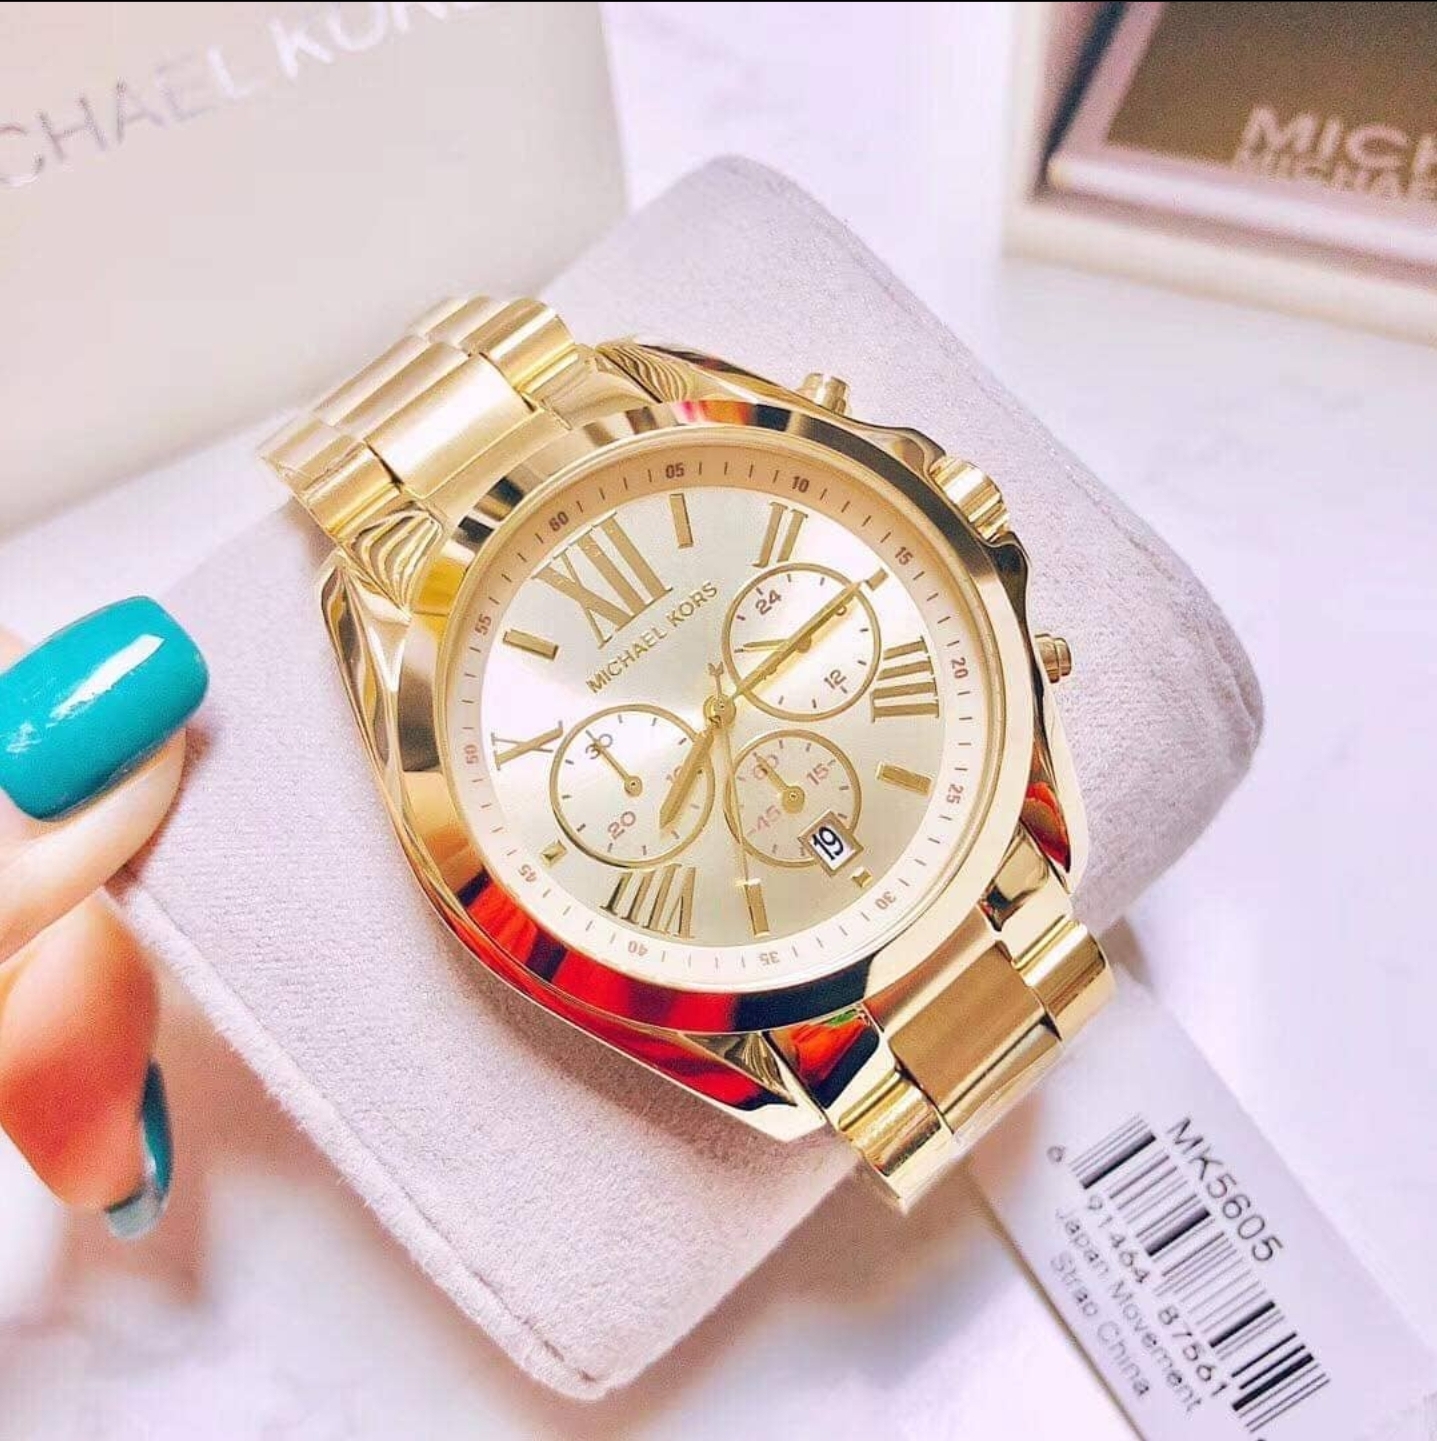 Michael kors 5605 Gold Thick Link Watch for Sale in Brooklyn NY  OfferUp